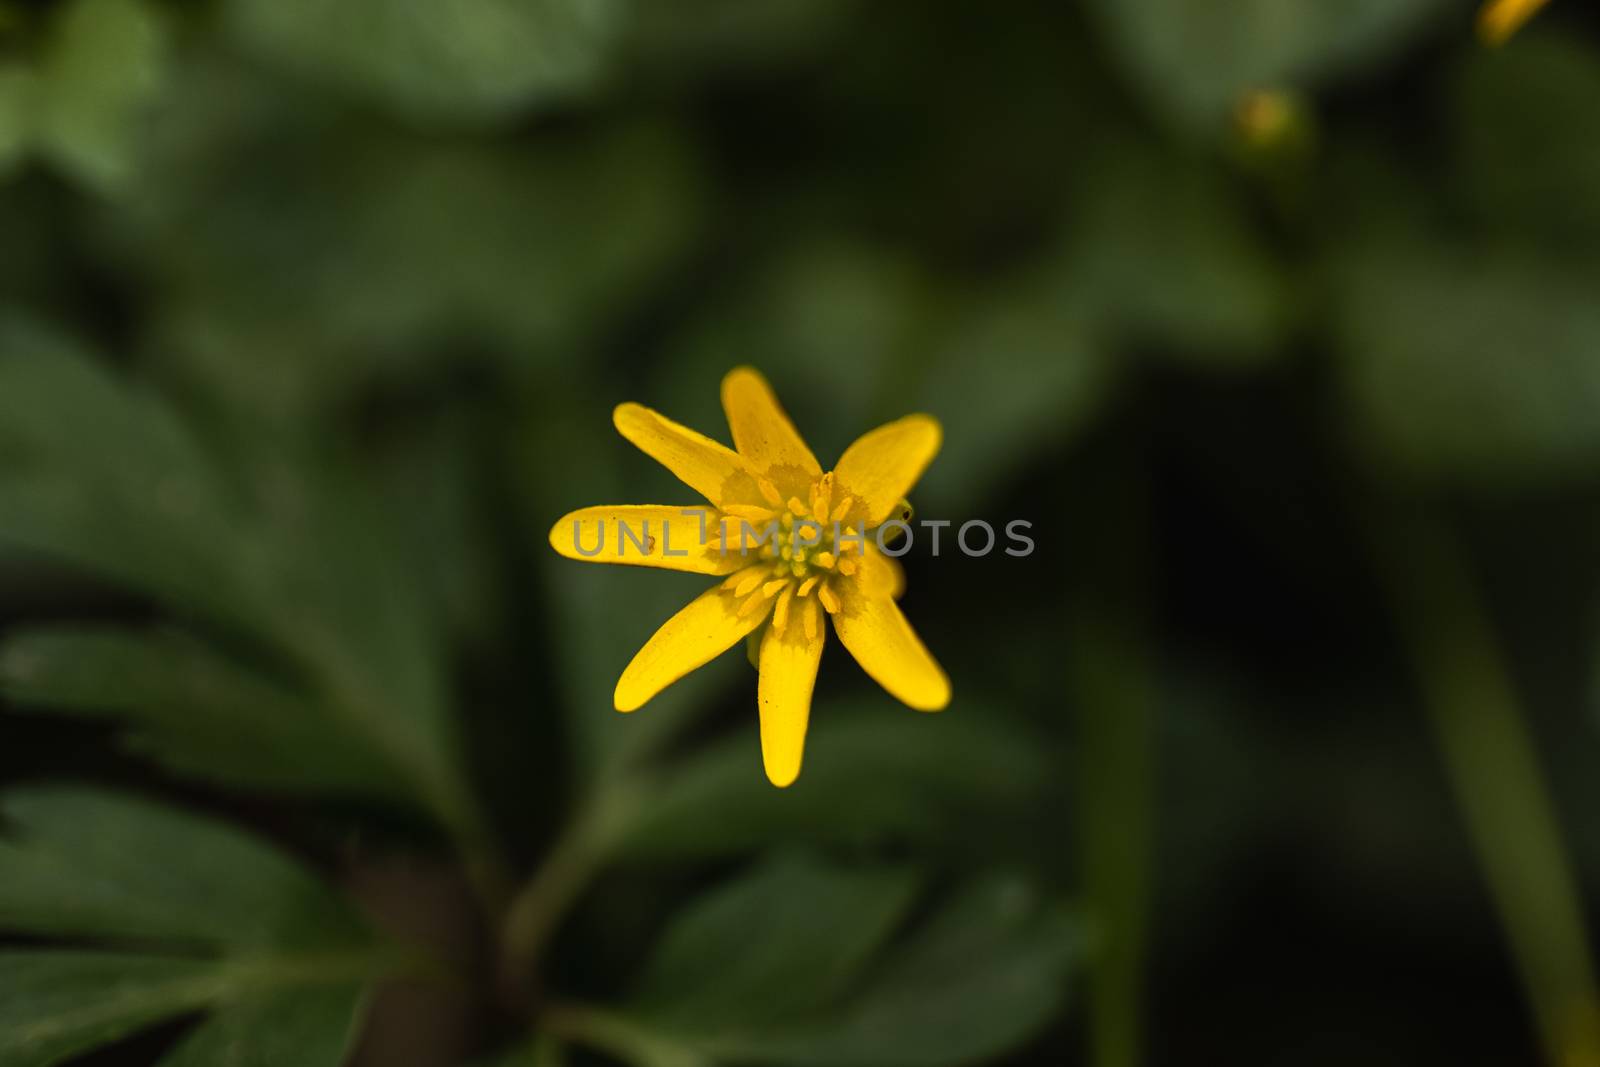 A small yellow flower close up in the wild